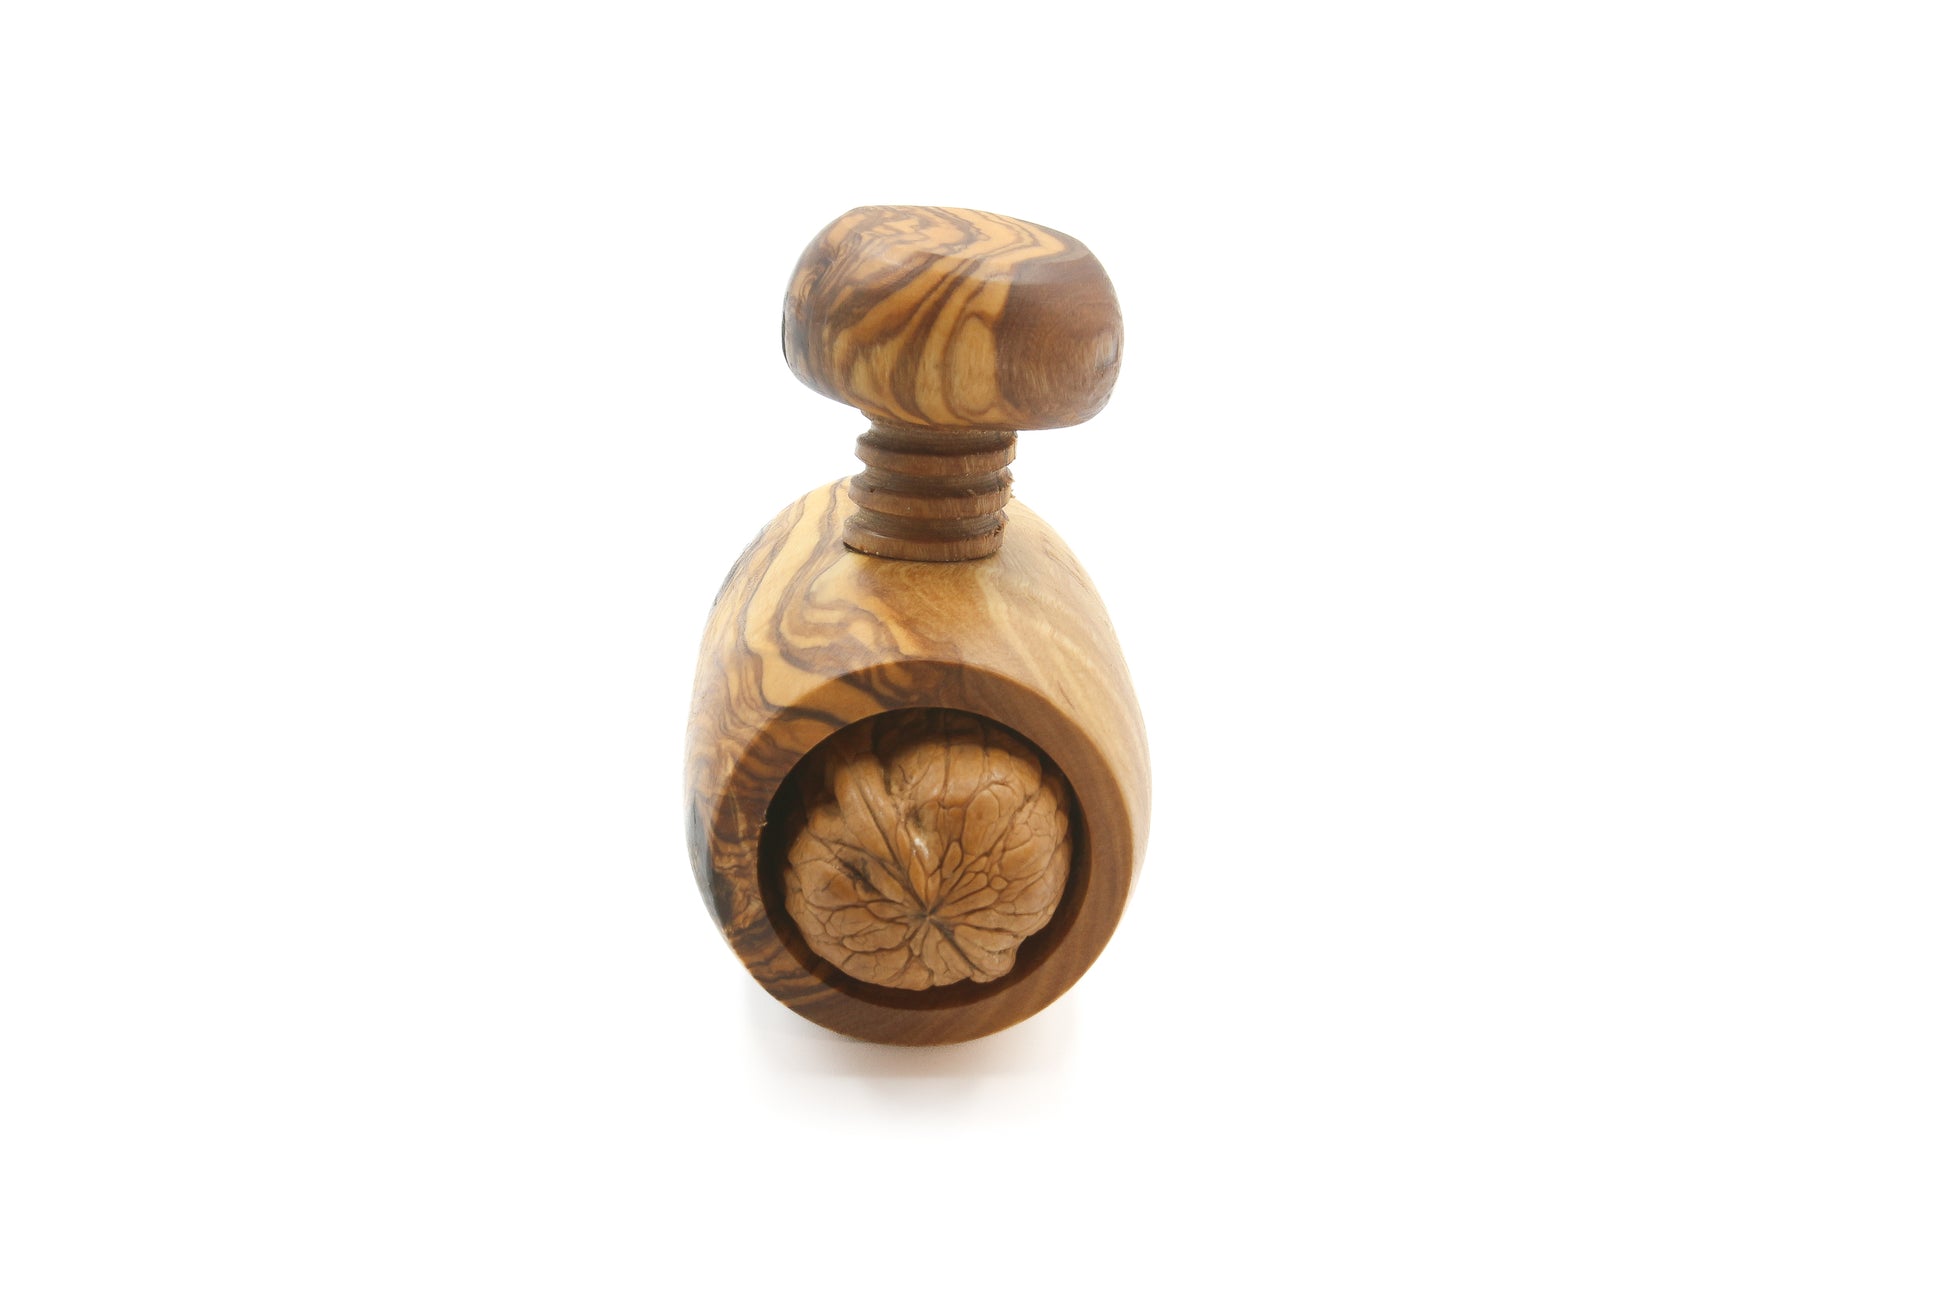 Artisan-made nut cracker in beautiful olive wood